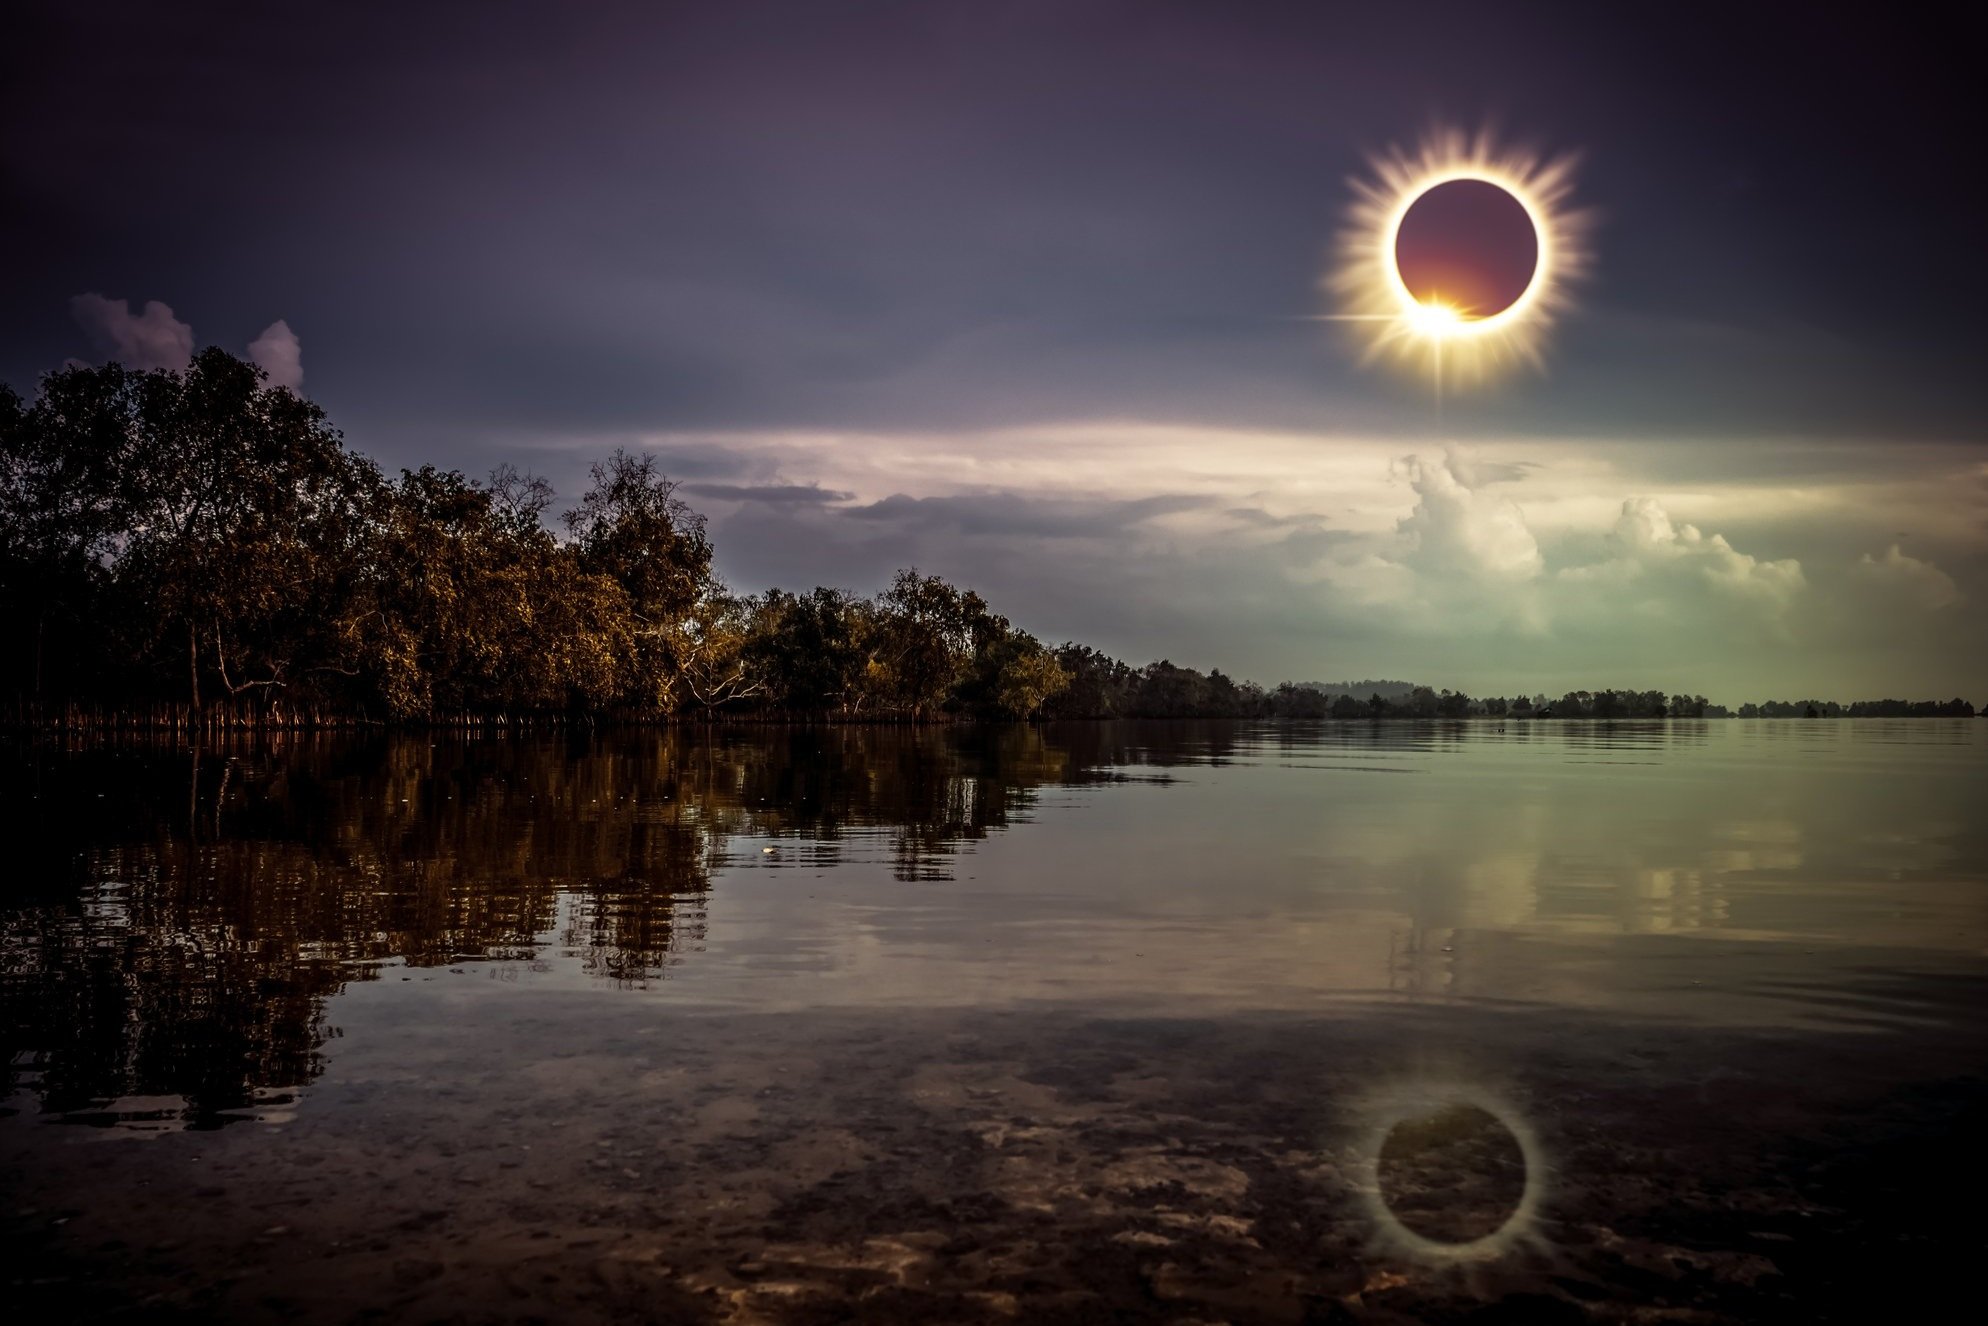 Where is the Best Place to see the Eclipse in the Adirondacks?